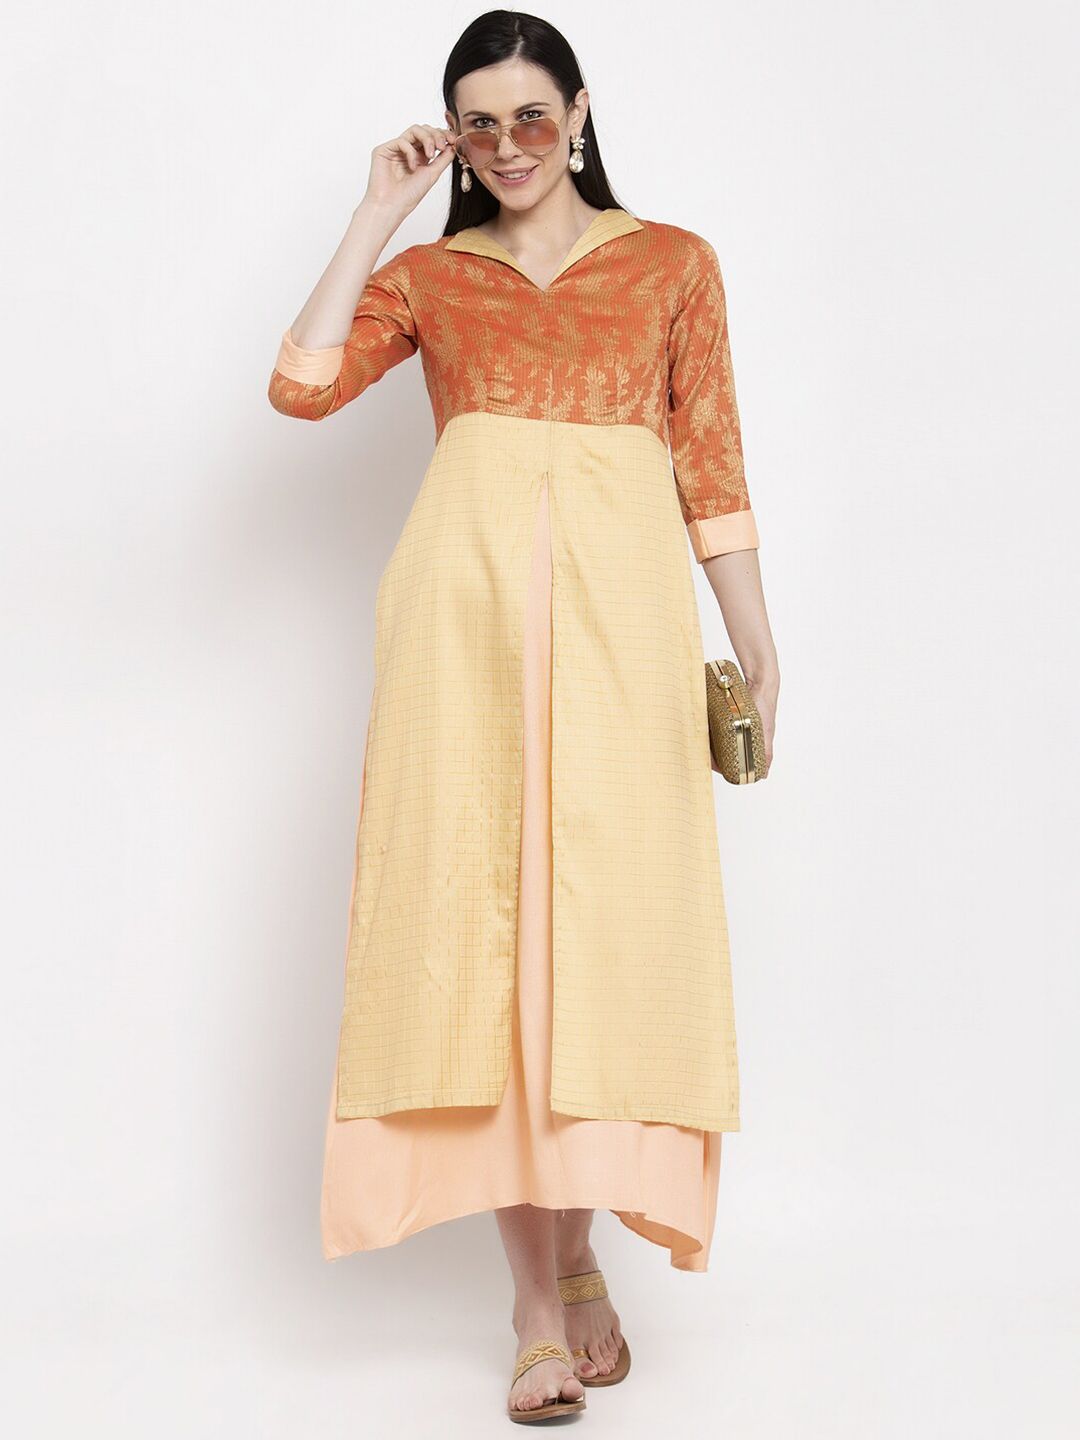 DUGRI BE THE ONE Gold-Toned Floral A-Line Midi Dress Price in India